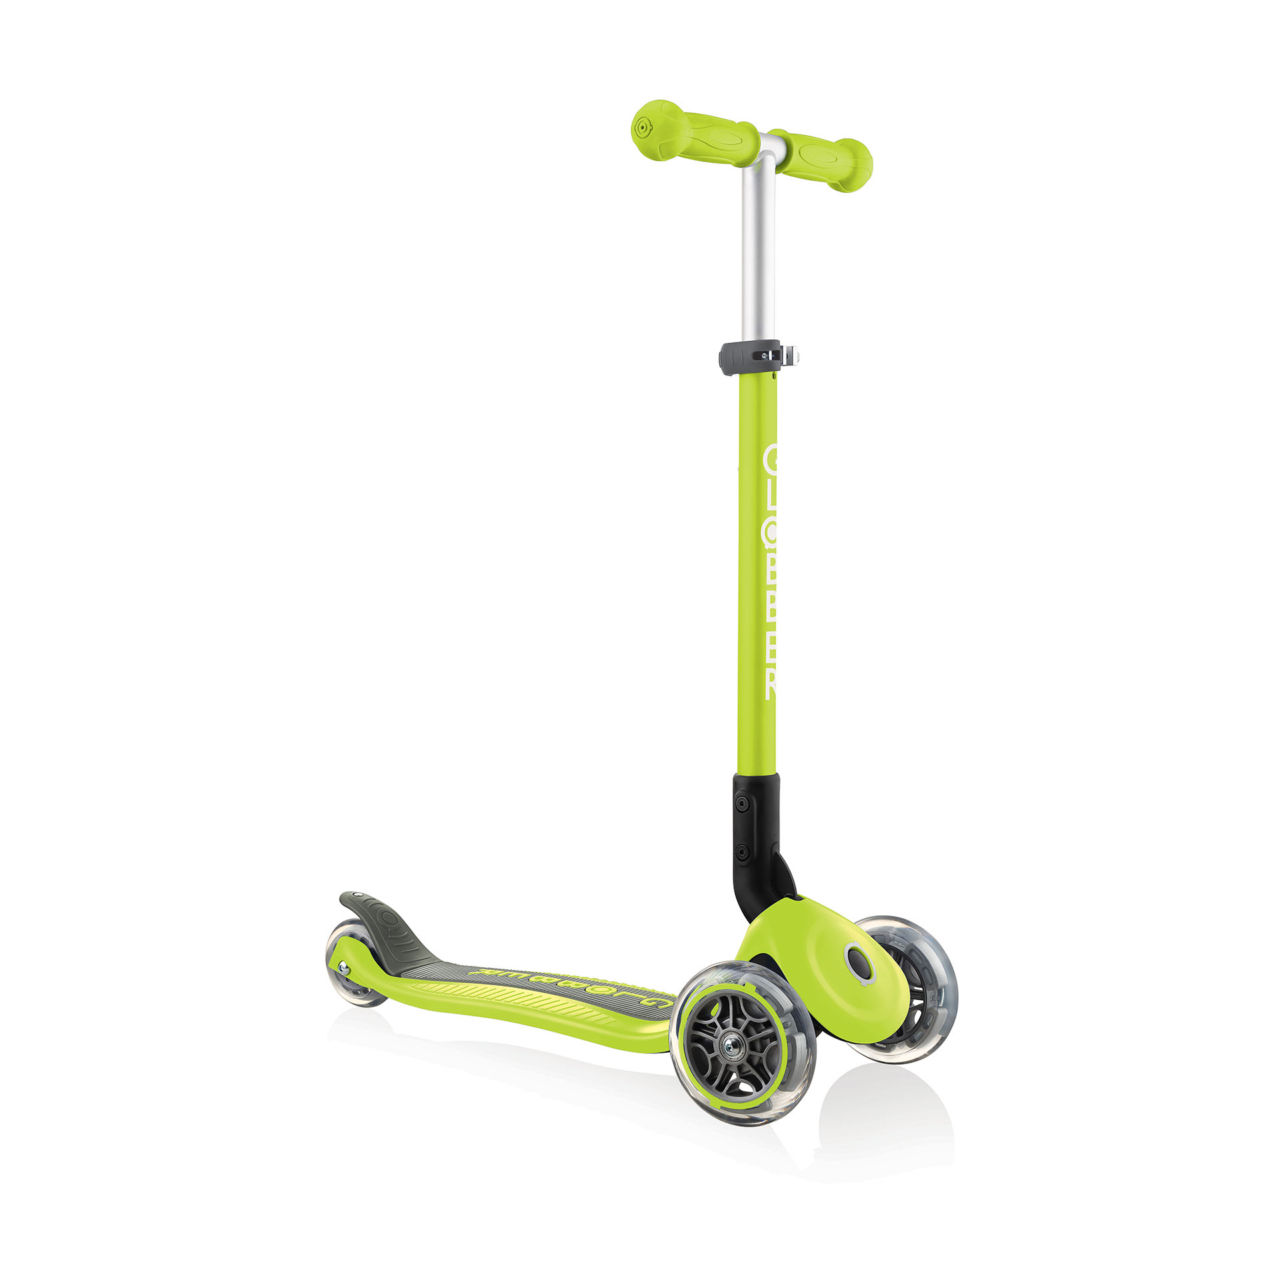 430 106 2 Collapsible Scooter For 3 Years Old